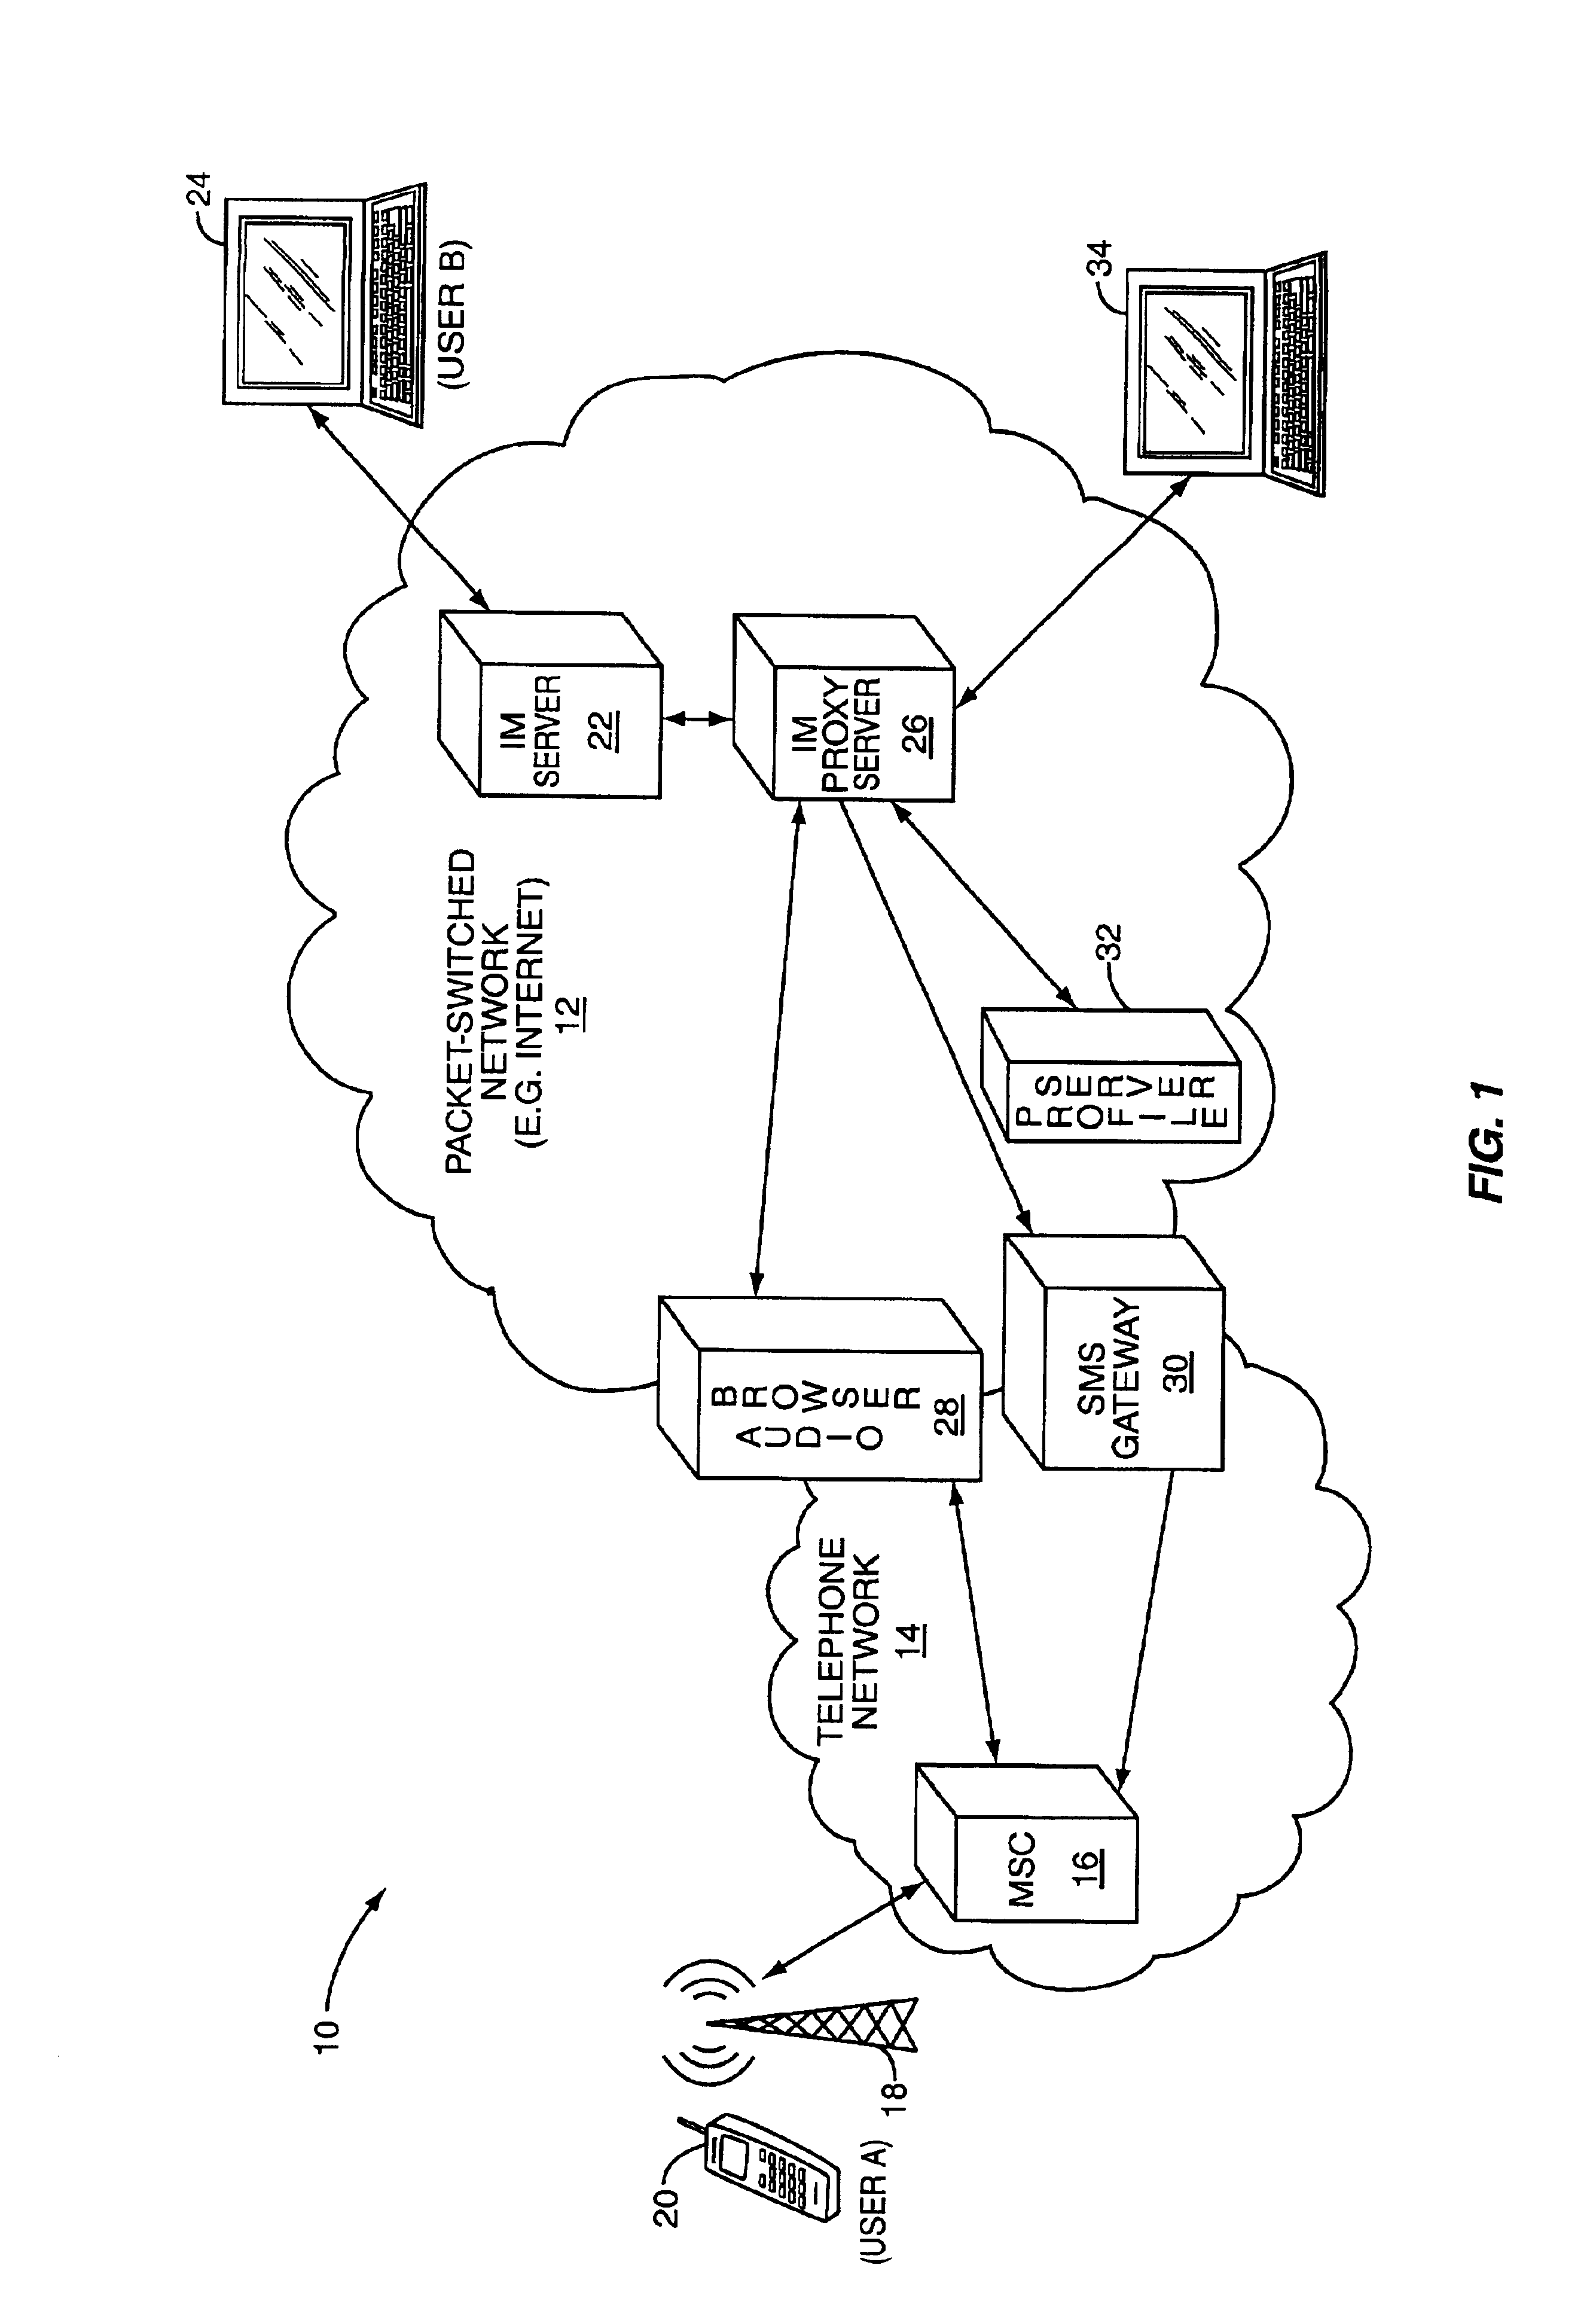 Instant messaging using a wireless interface